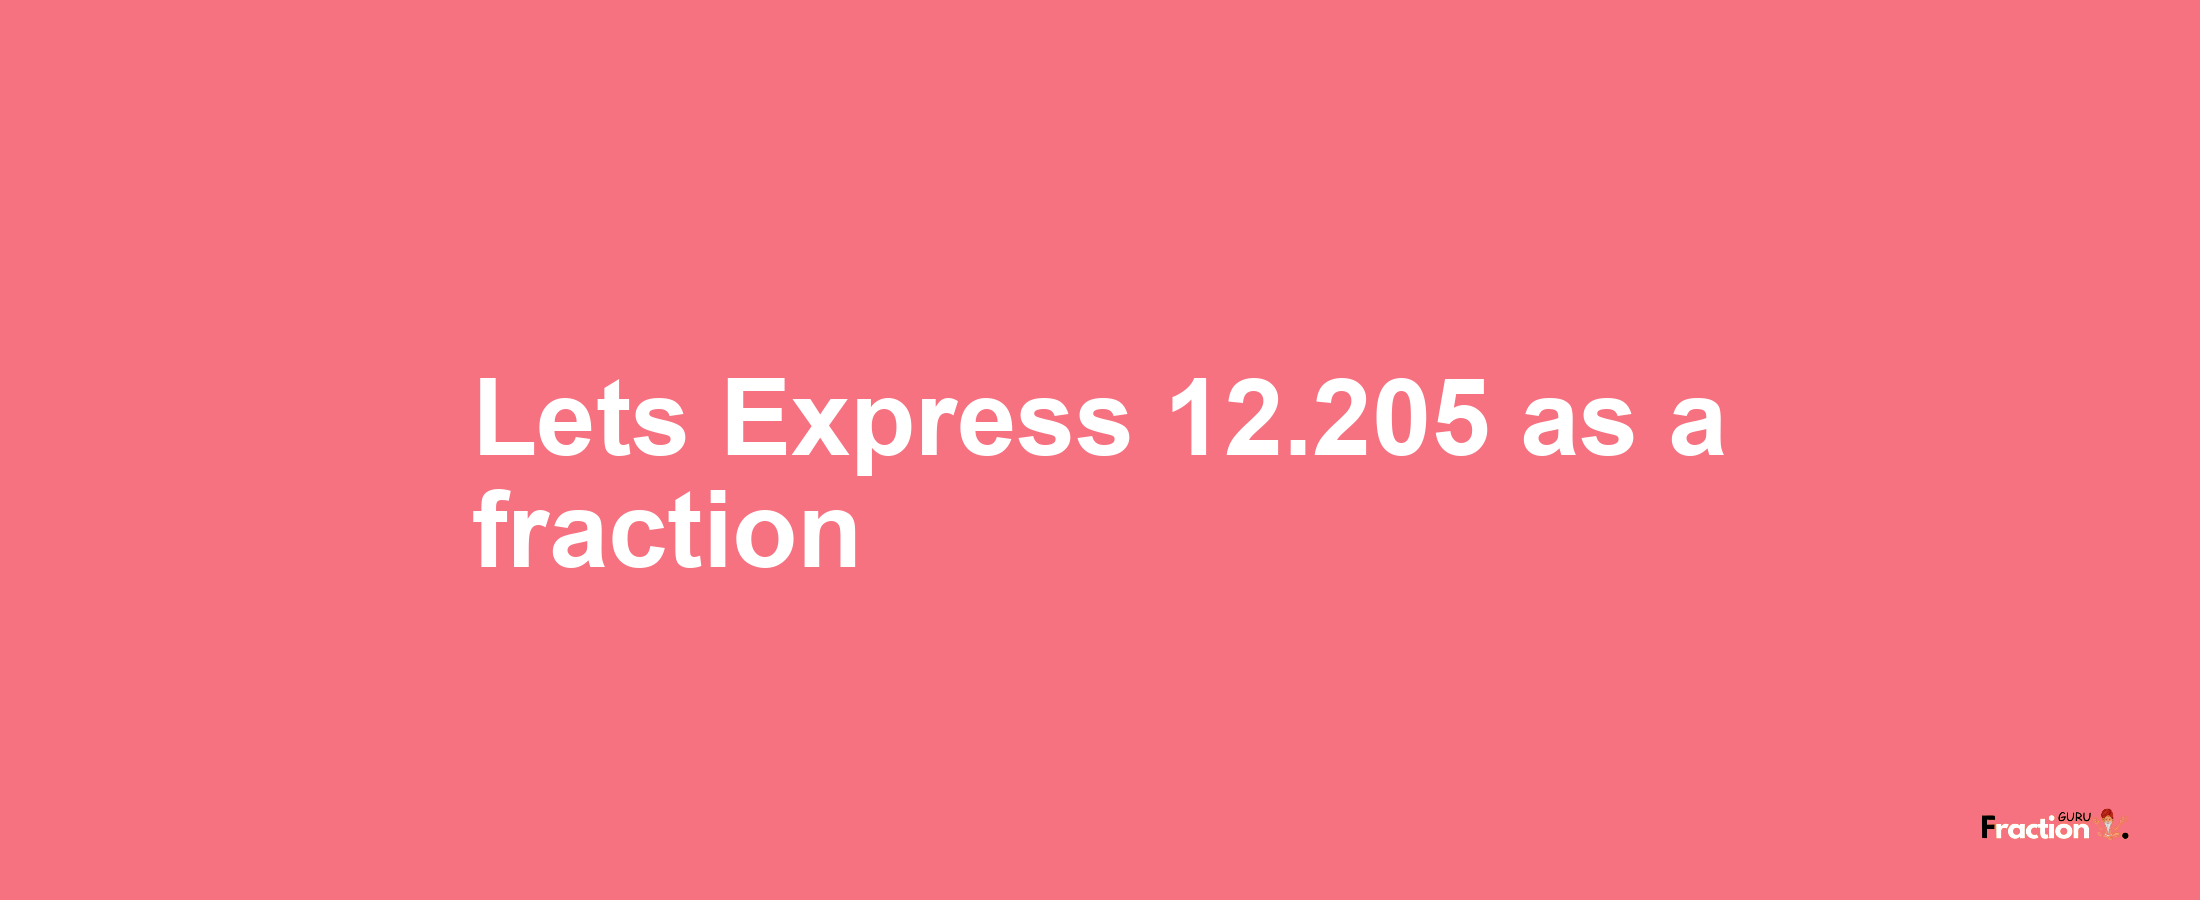 Lets Express 12.205 as afraction